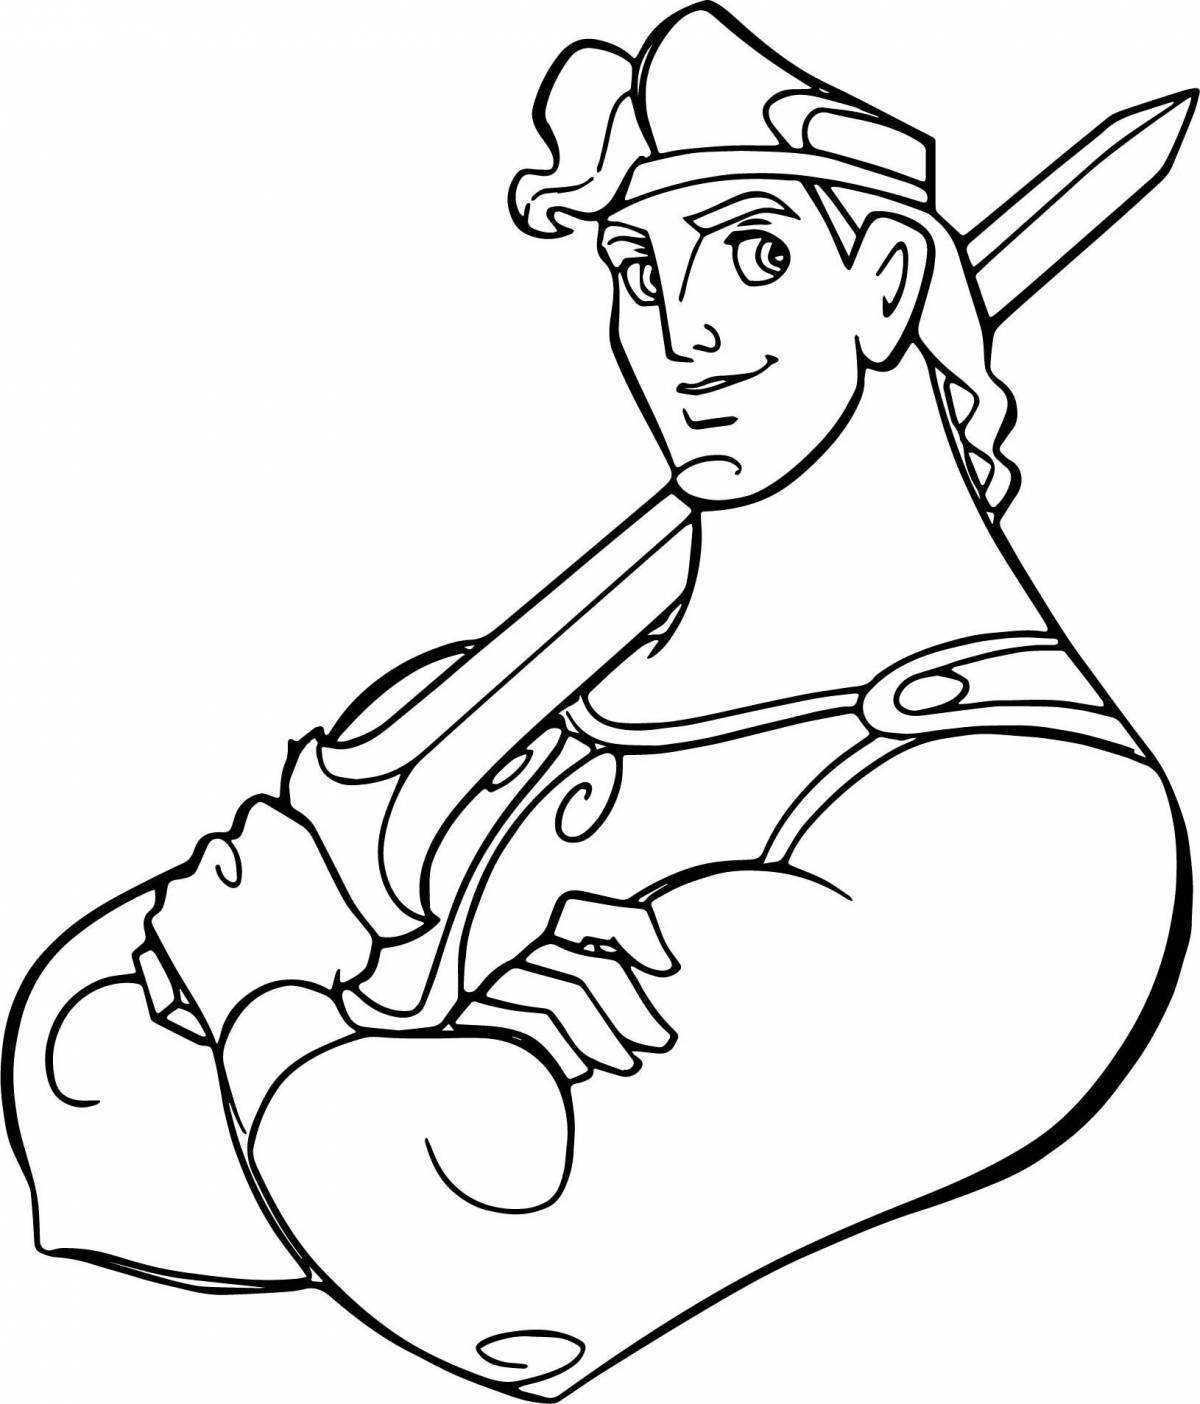 Coloring page luxurious hercules